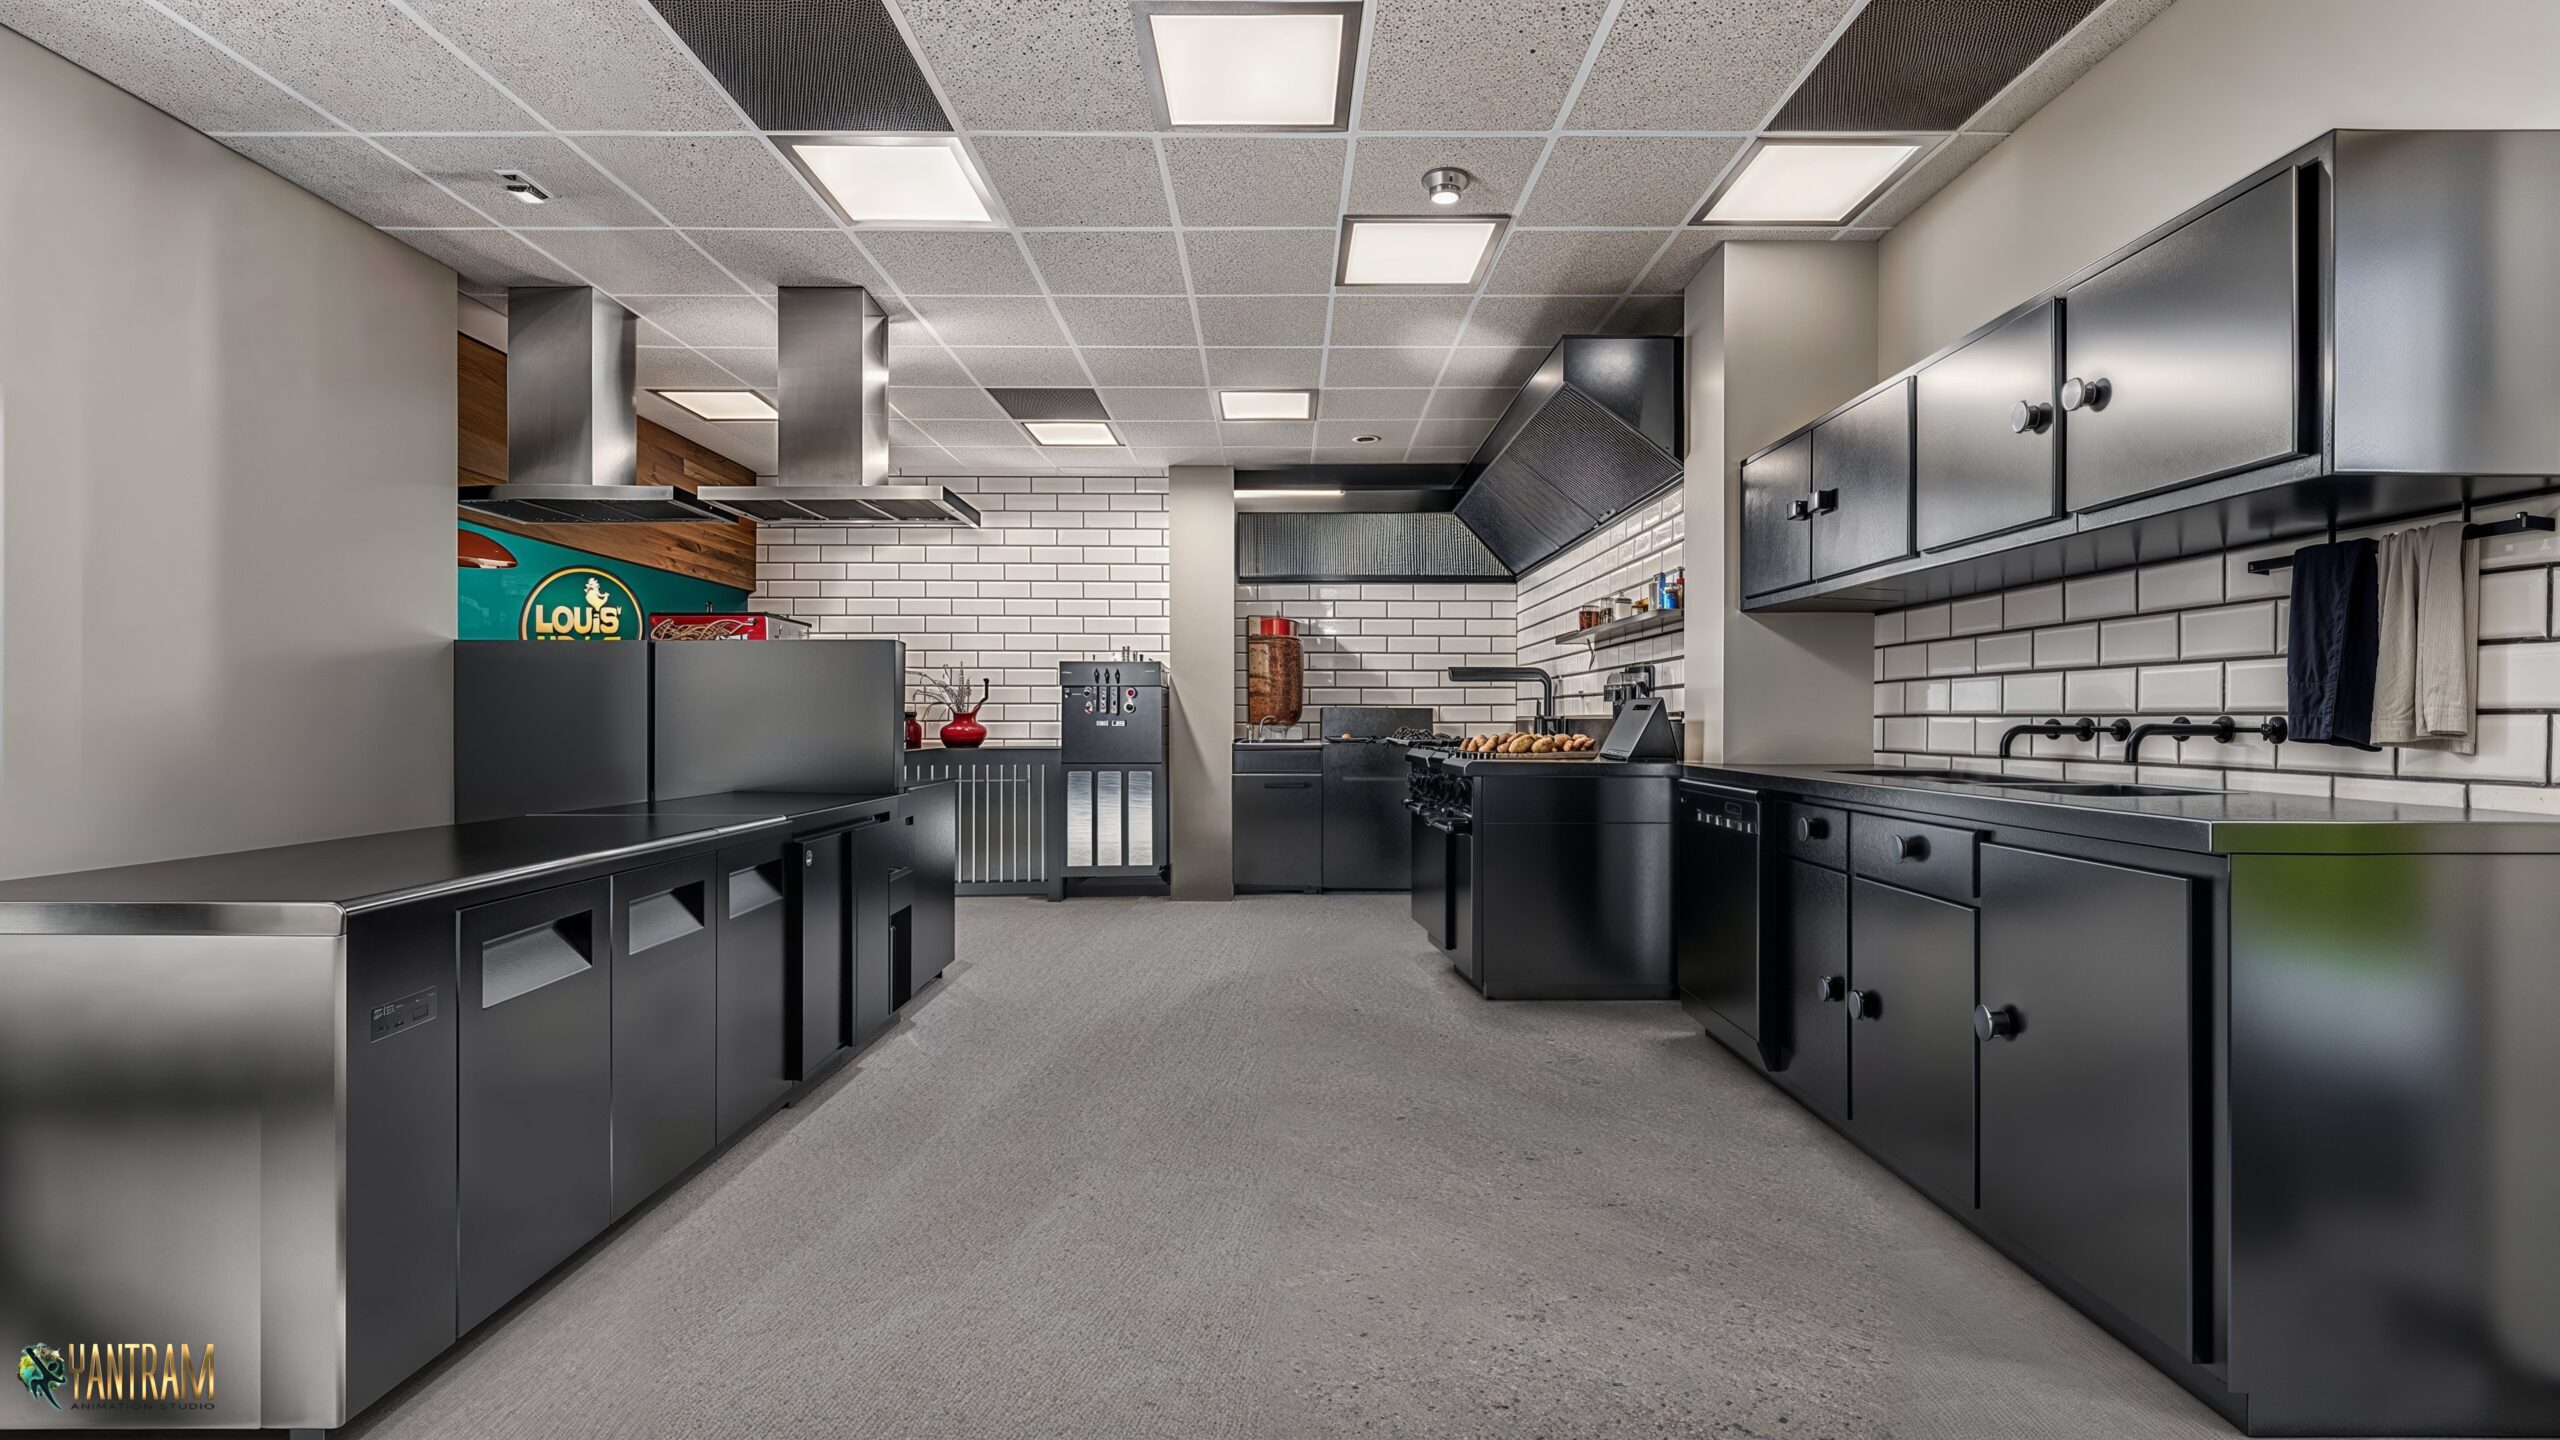 Cluck & Layout Optimizing Kitchen Efficiency for Chicken Shops with 3D Interior Design